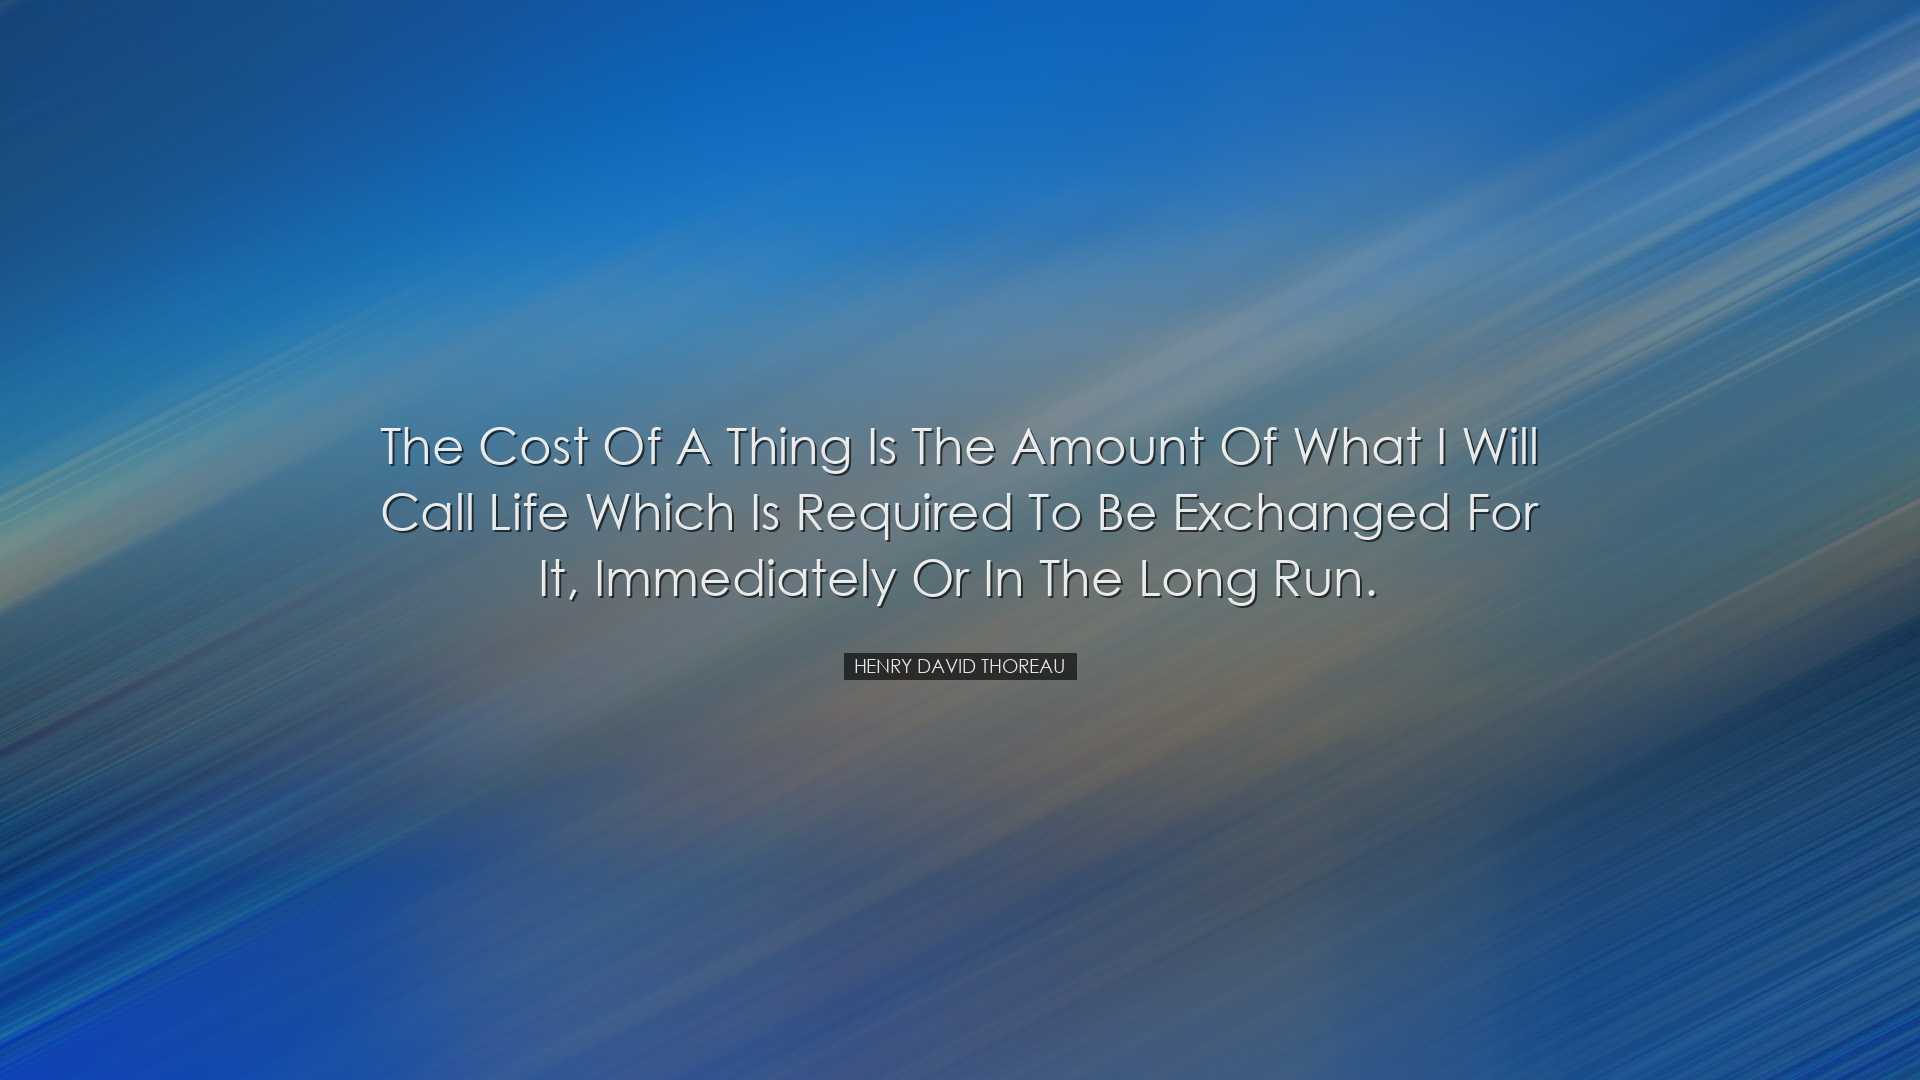 The cost of a thing is the amount of what I will call life which i